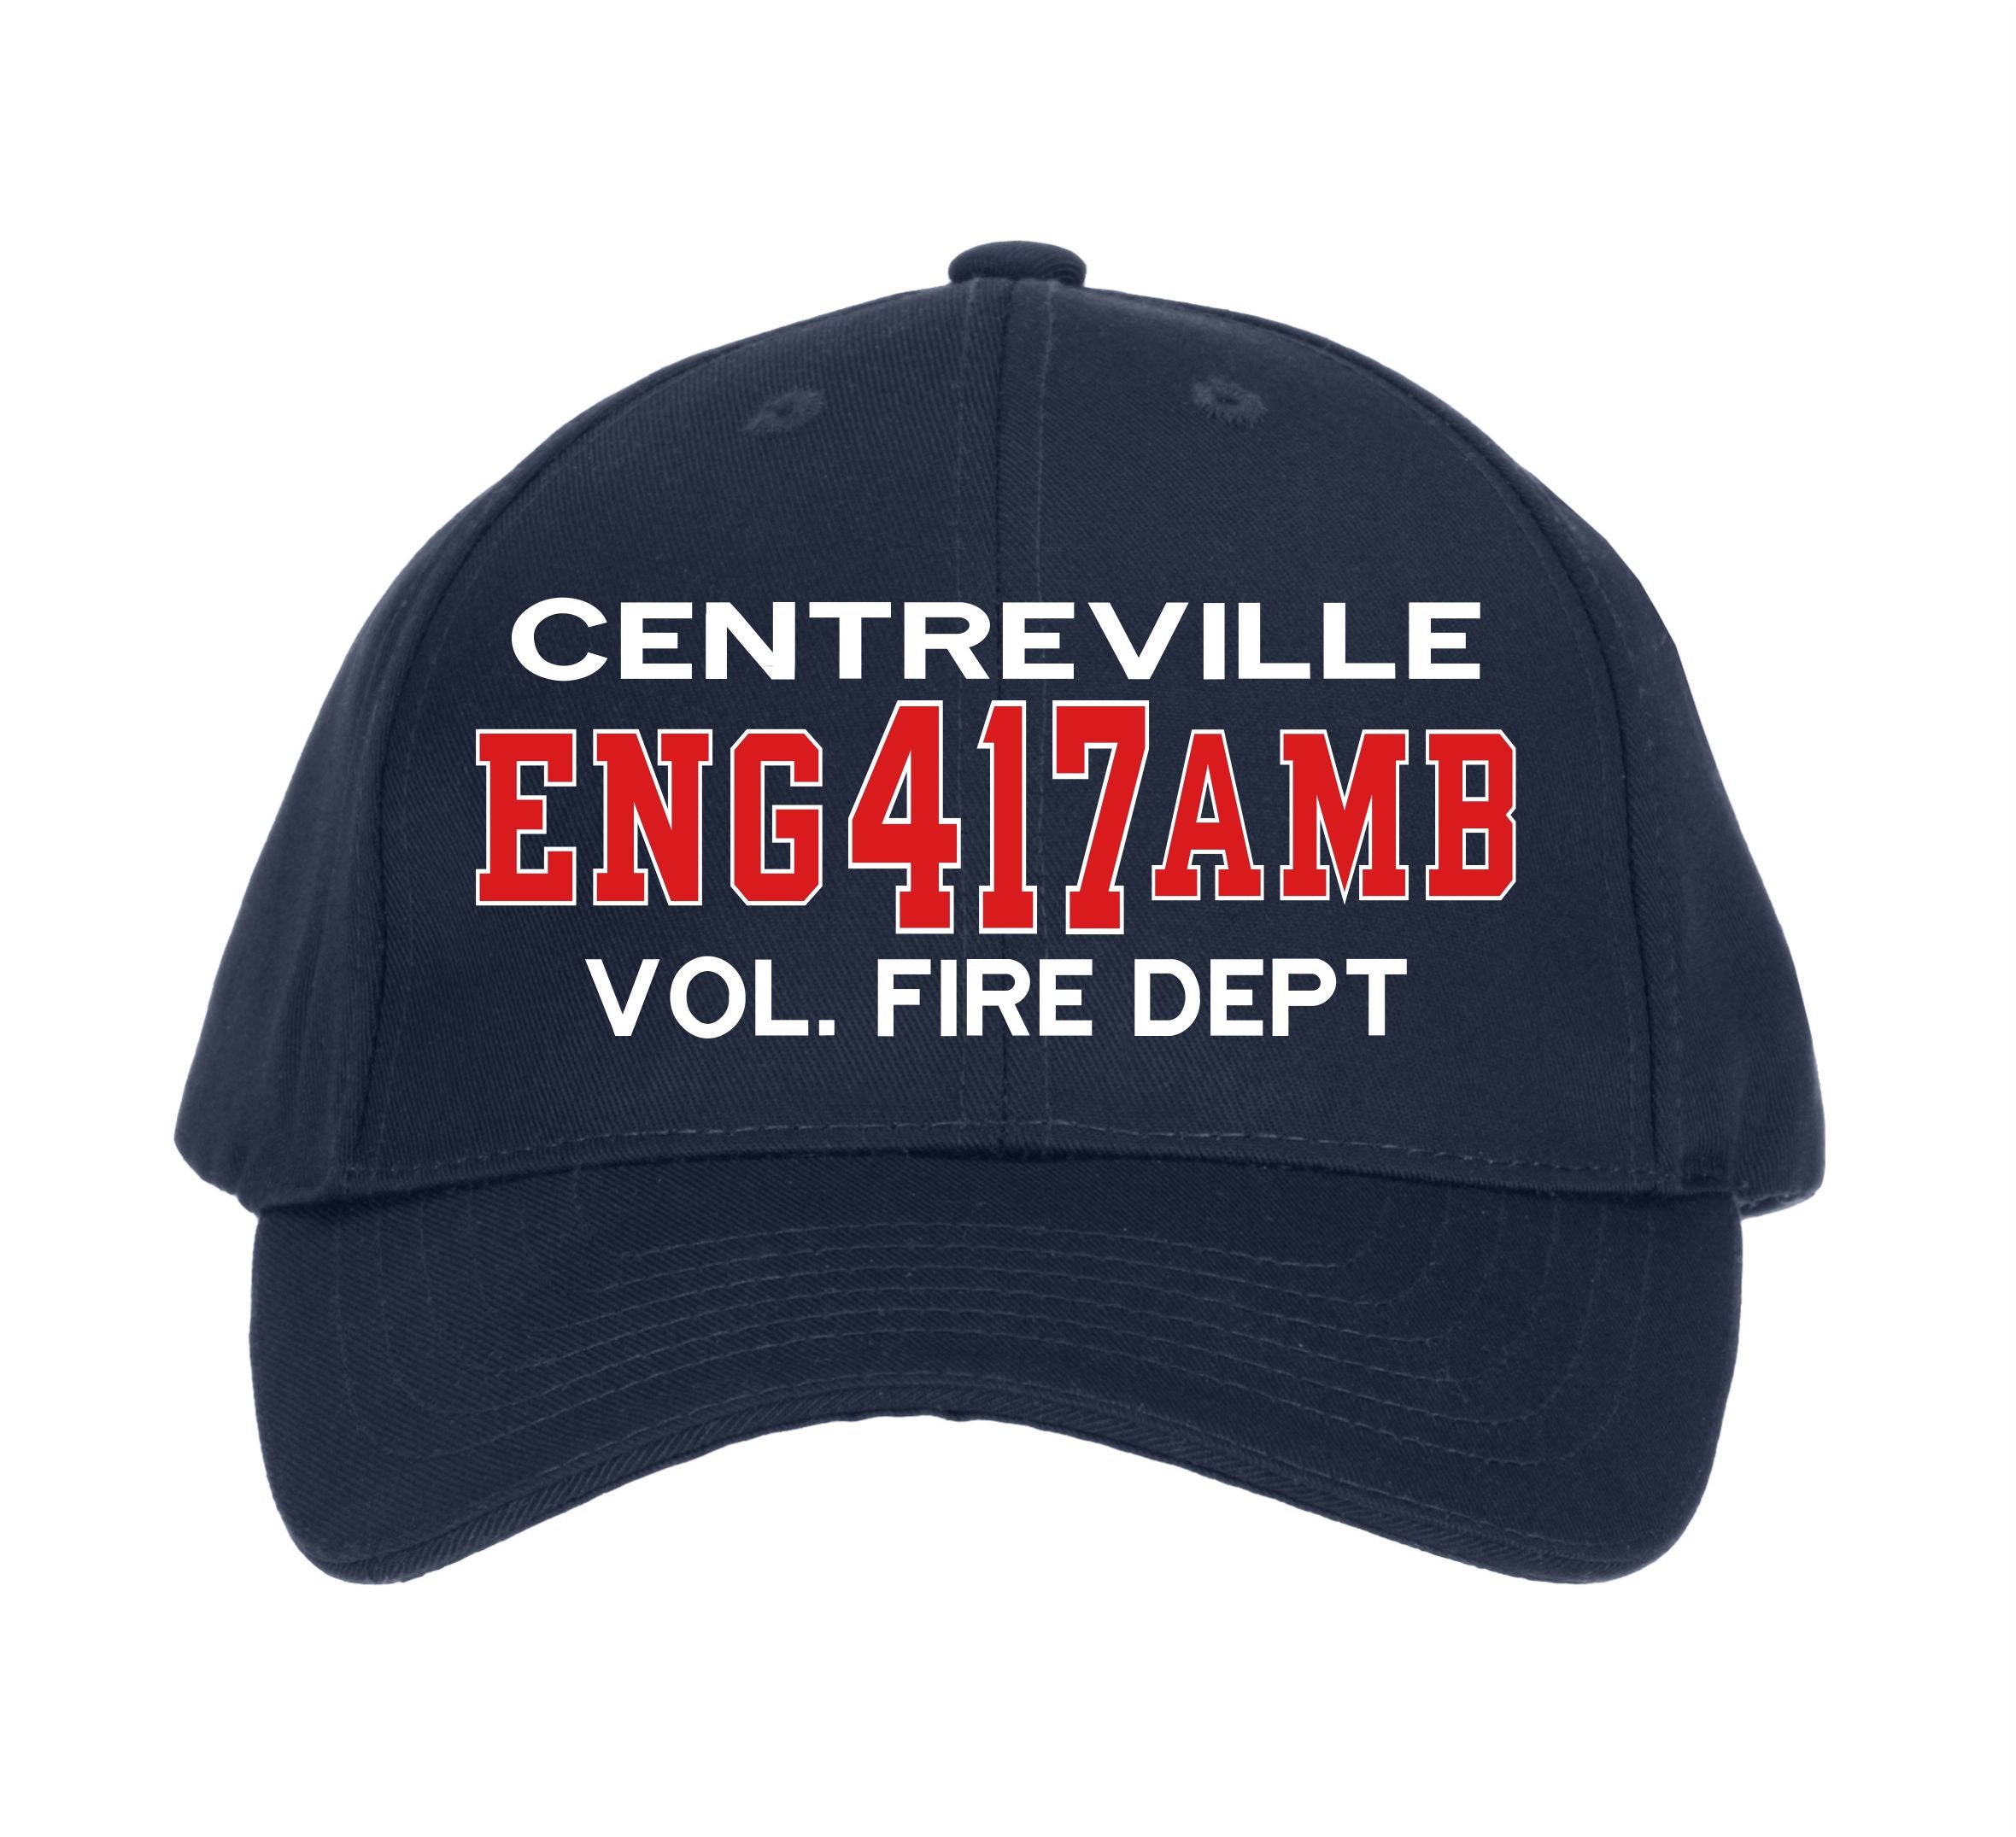 Centreville ENG417AMB Embroidered Hat 